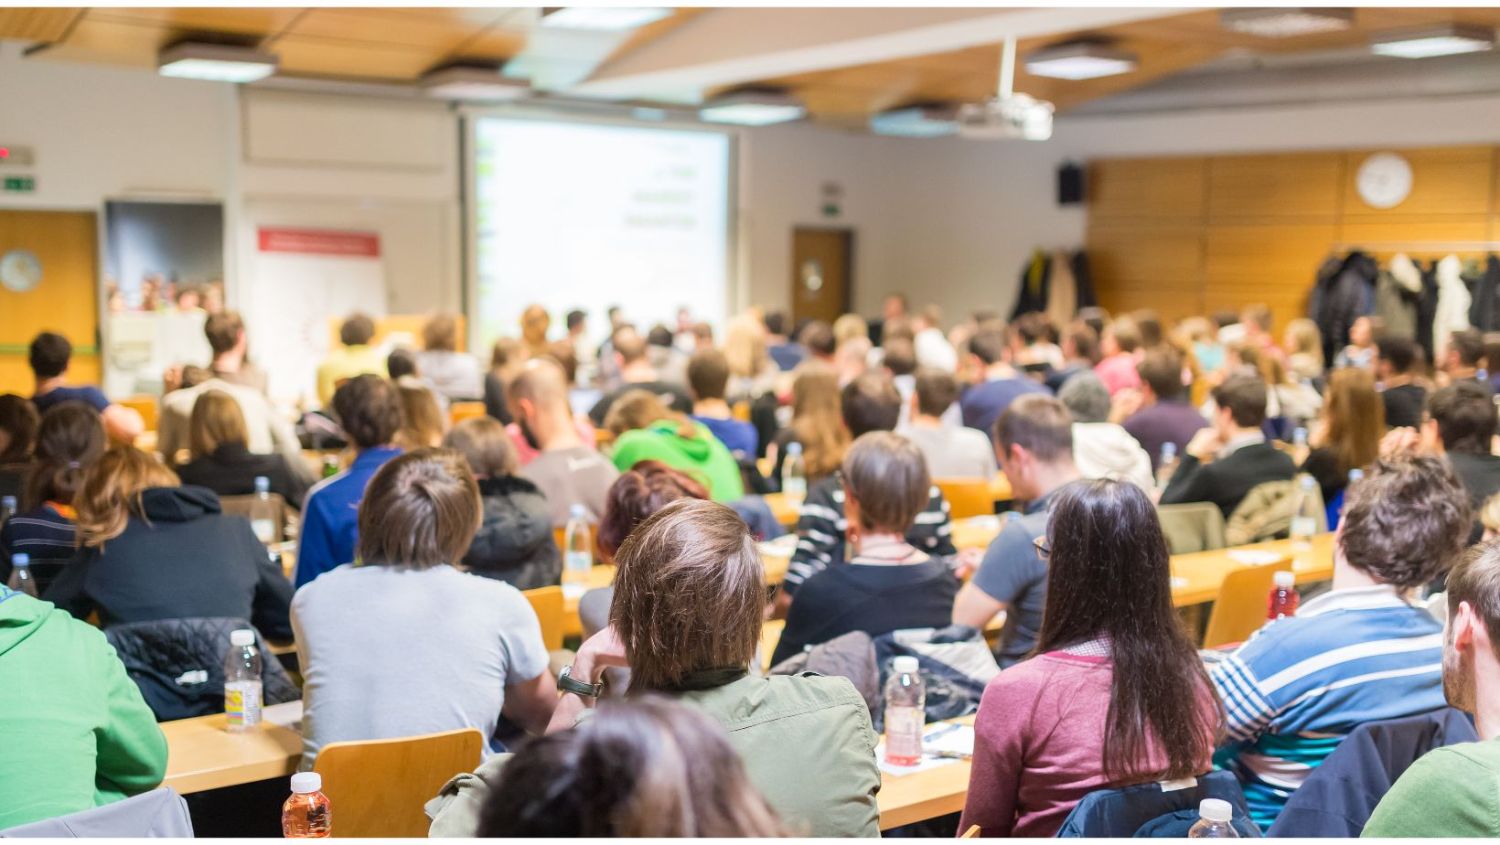 Image of crowded college lecture hall.